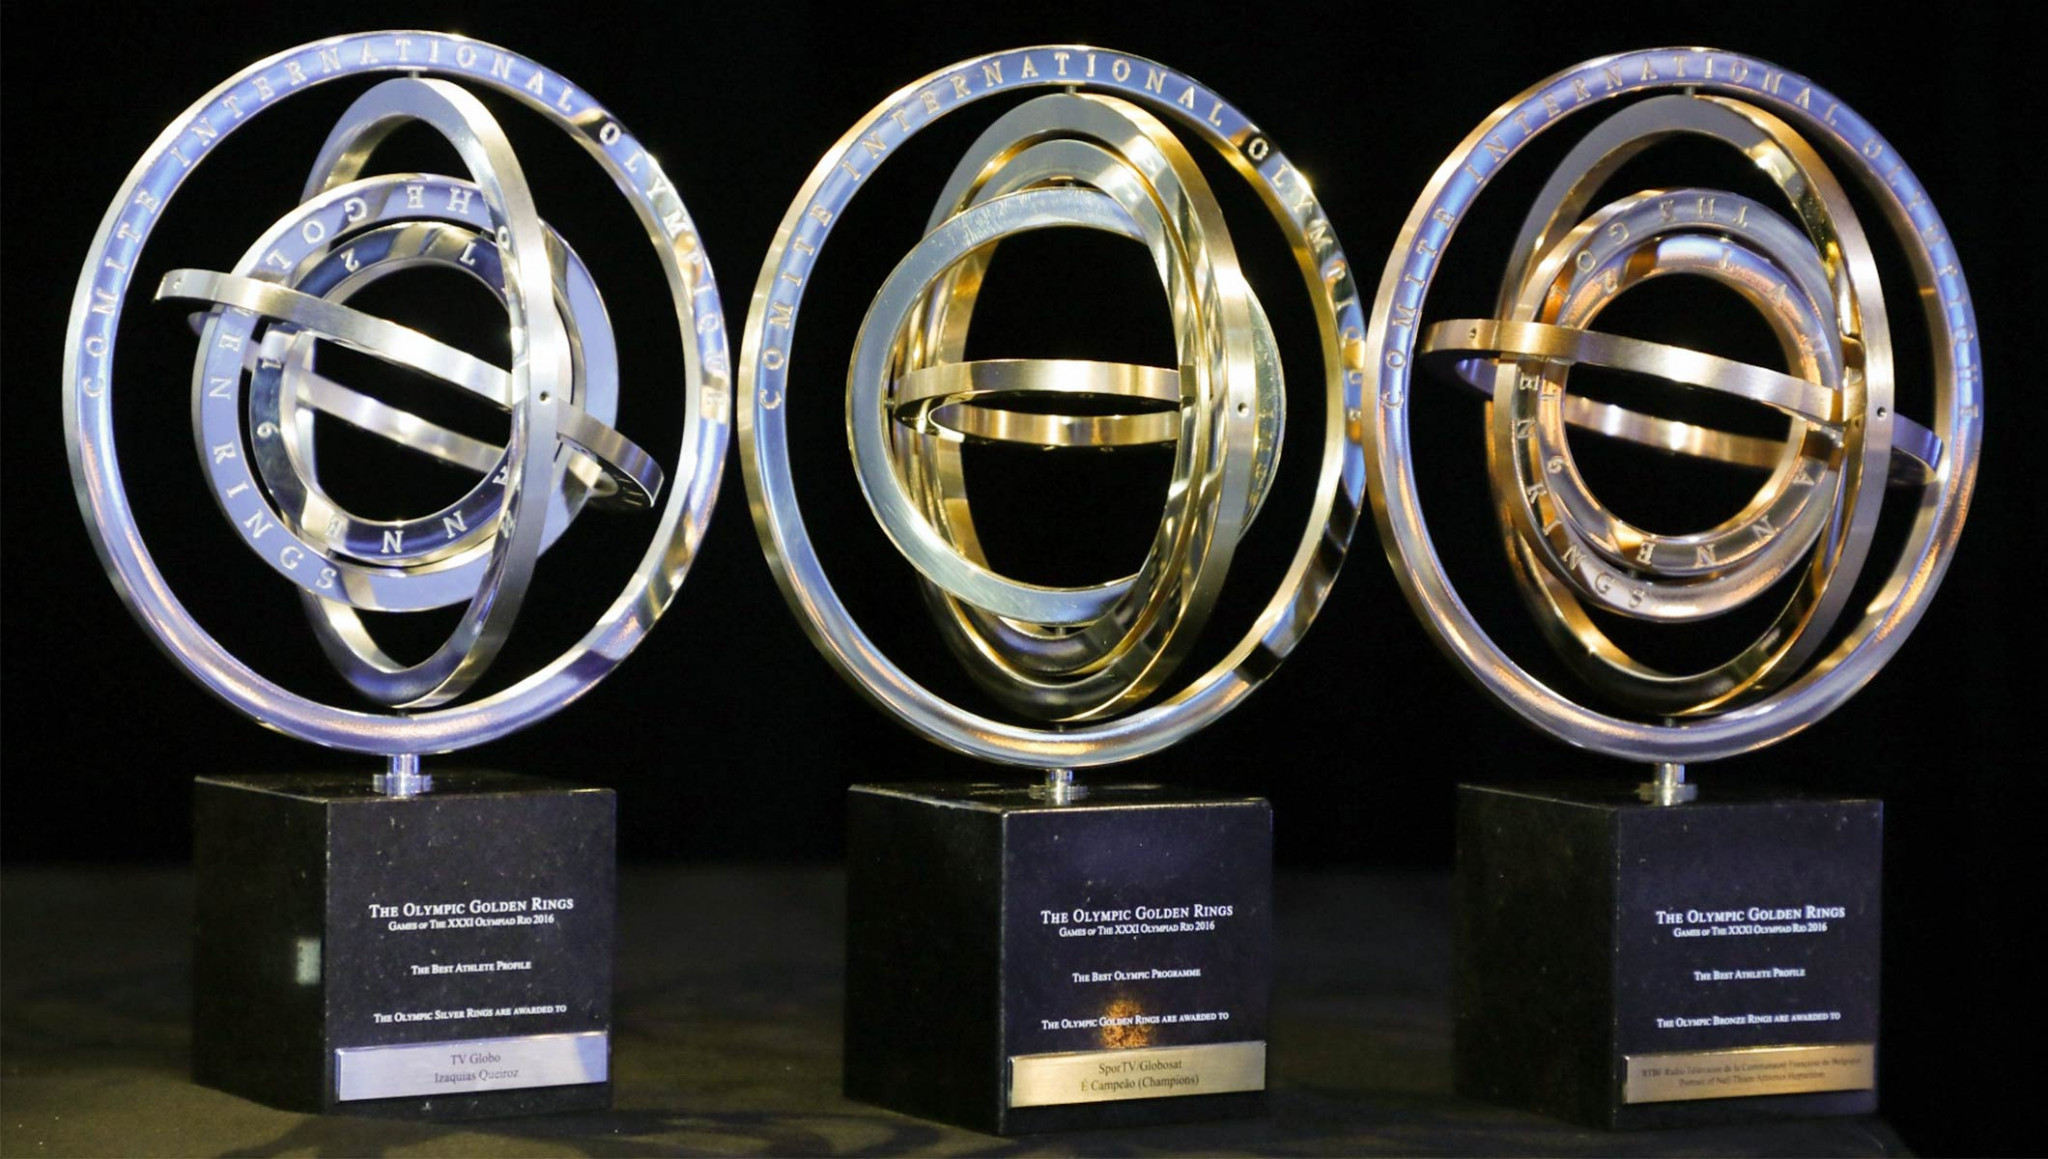 NBC scoop three awards for Rio 2016 coverage at IOC Golden Rings Awards 